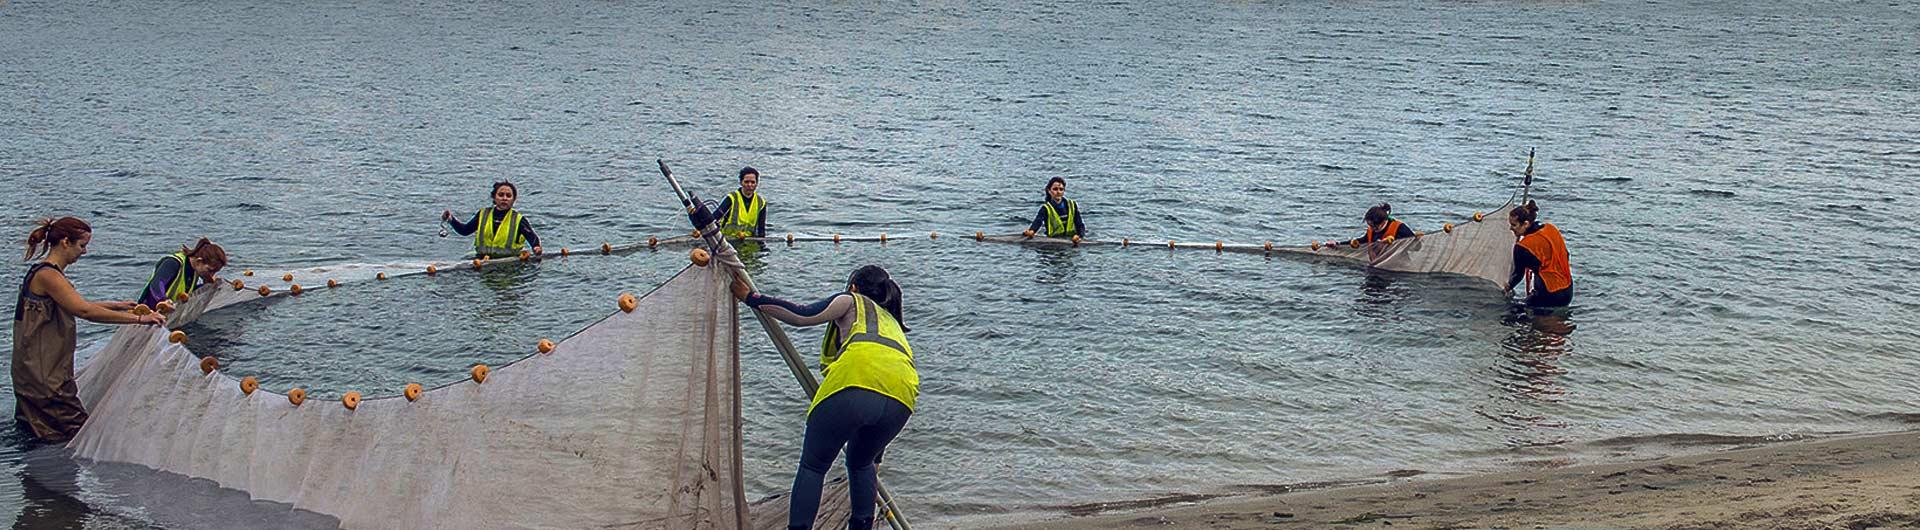 Students pulling a net in the water 